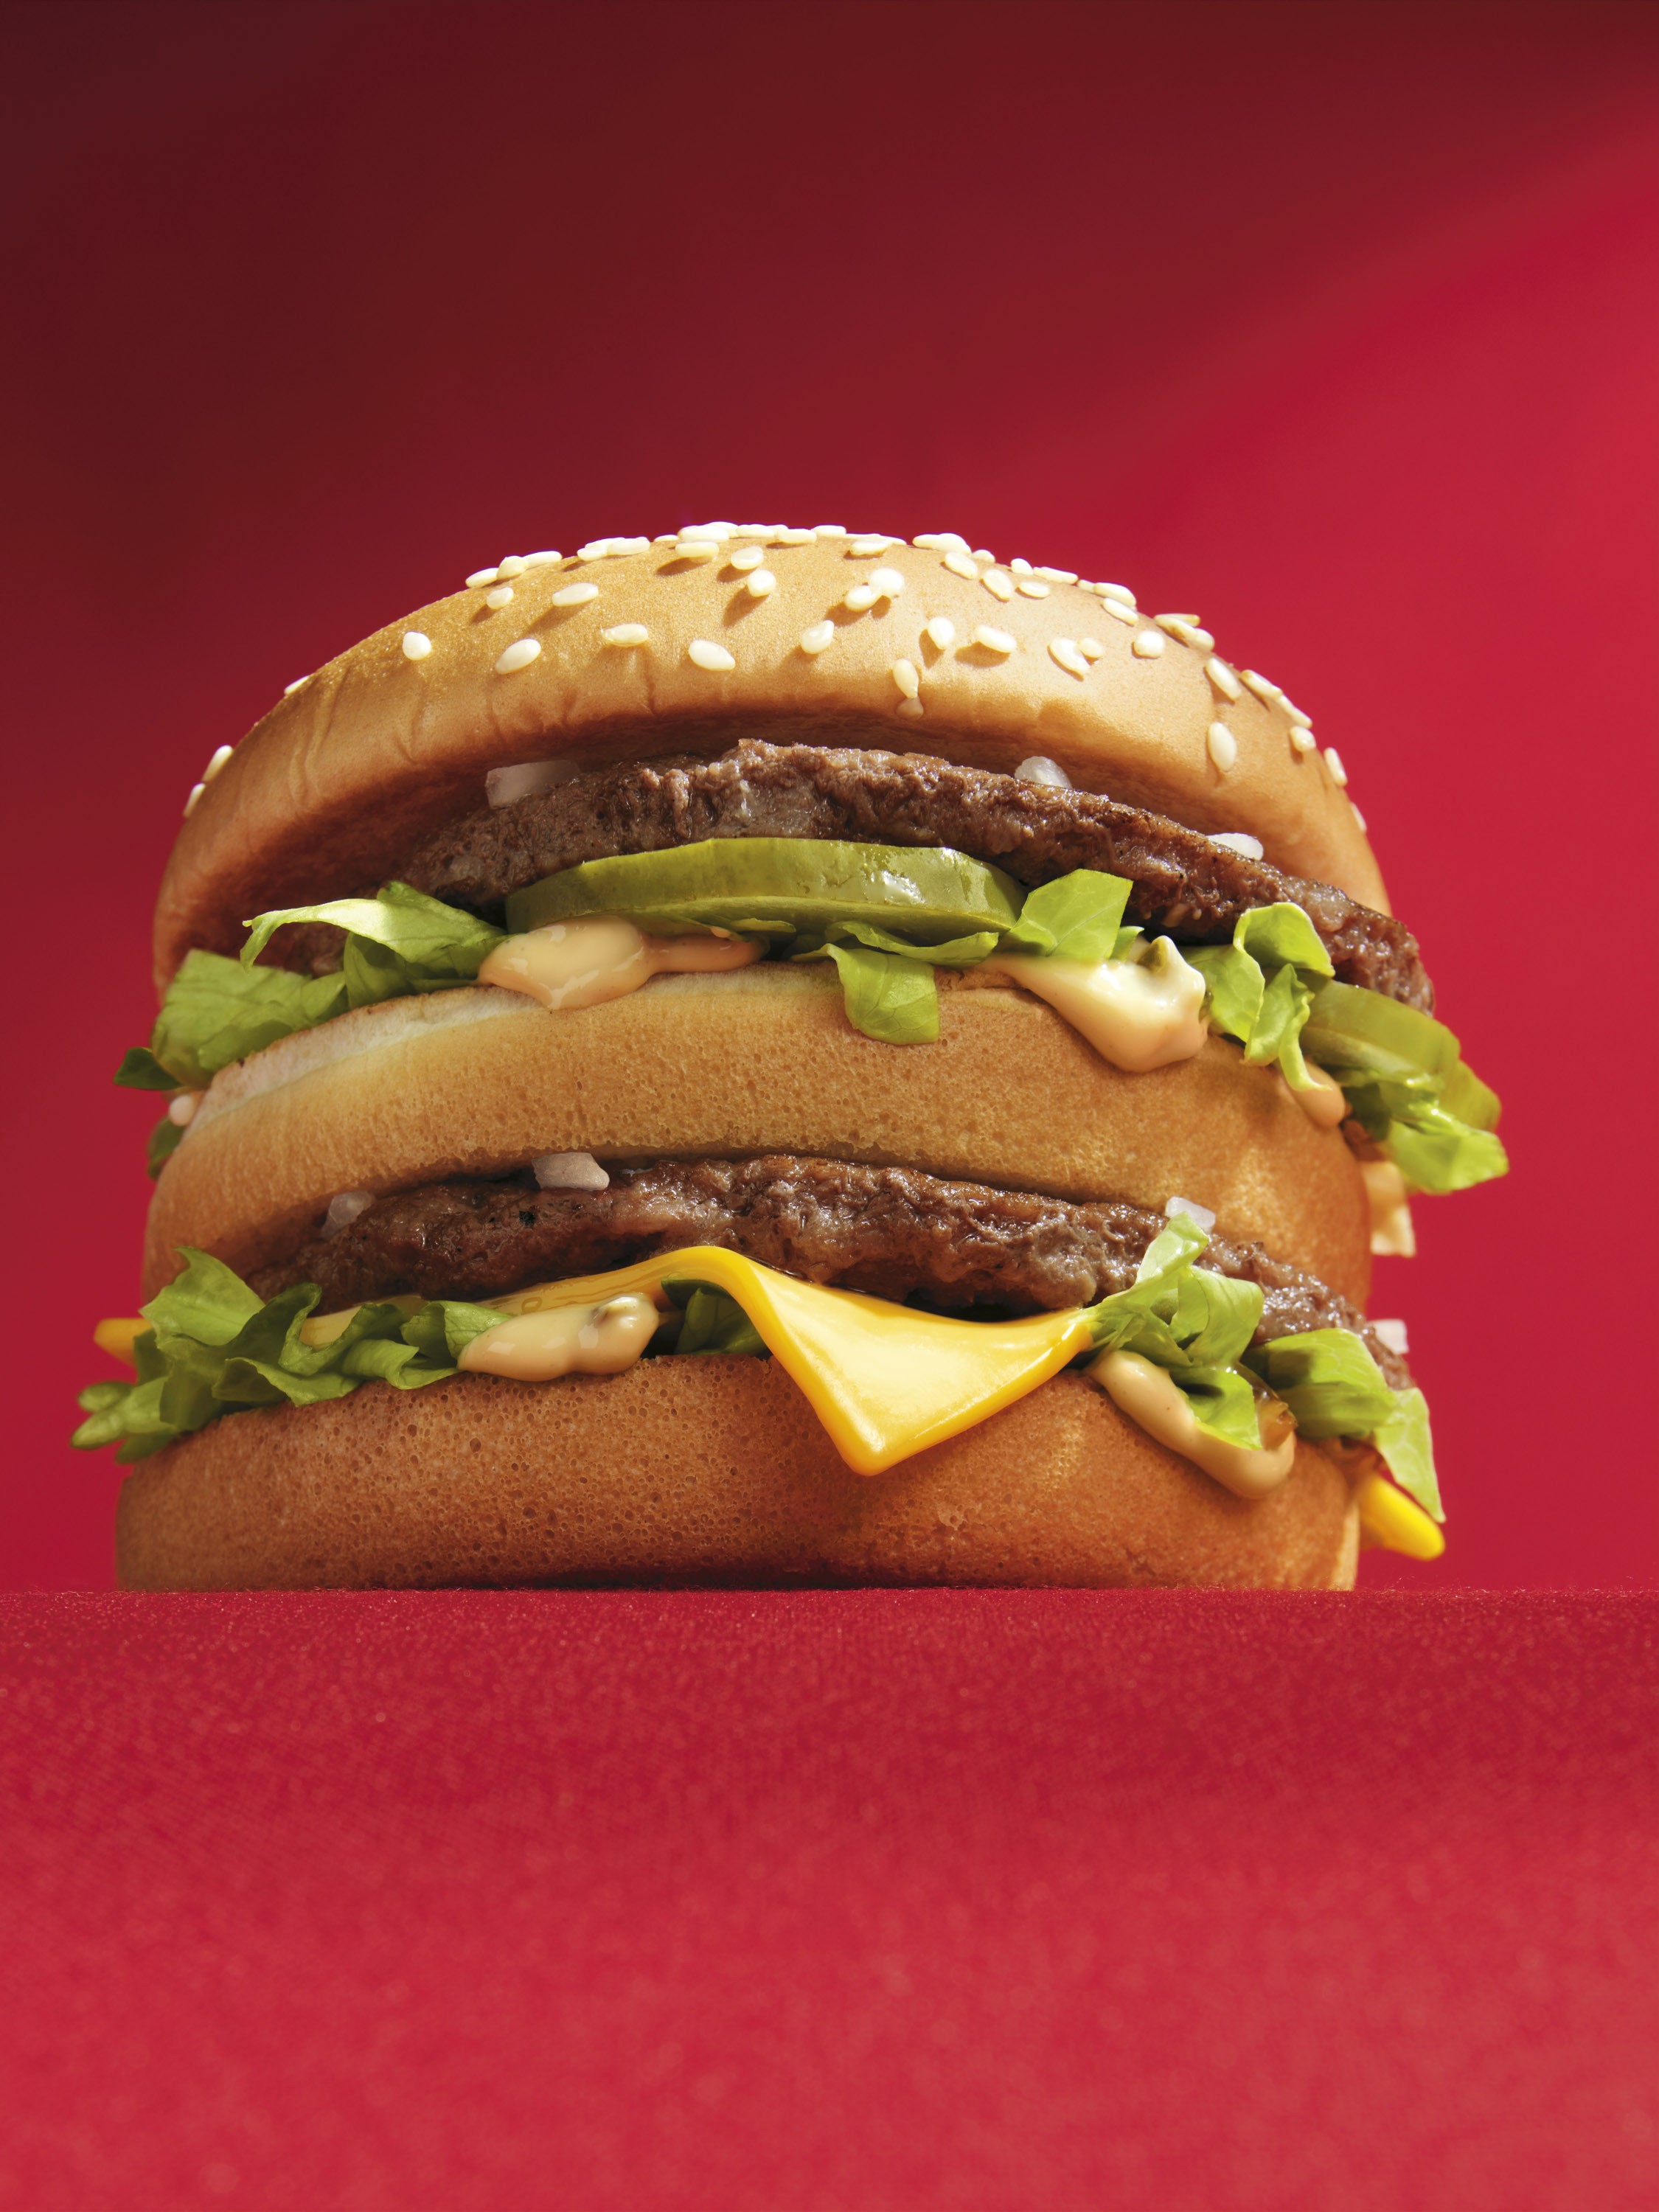 General 2250x3000 food burgers red background red